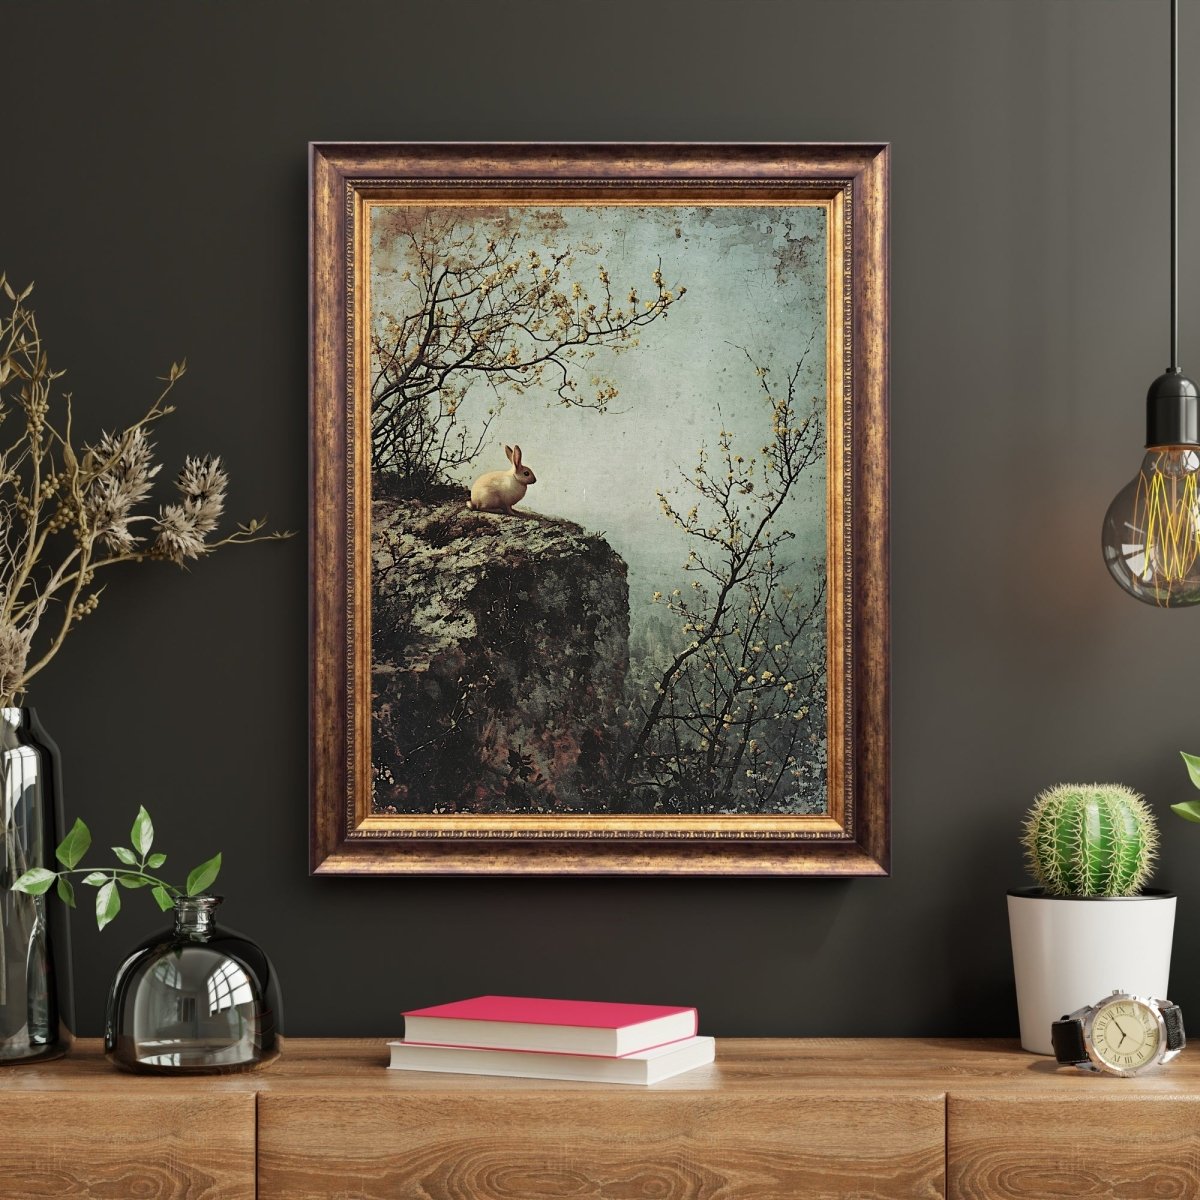 Spring Cliff & Lonely Rabbit - Vintage Wall Art Print - Everything Pixel